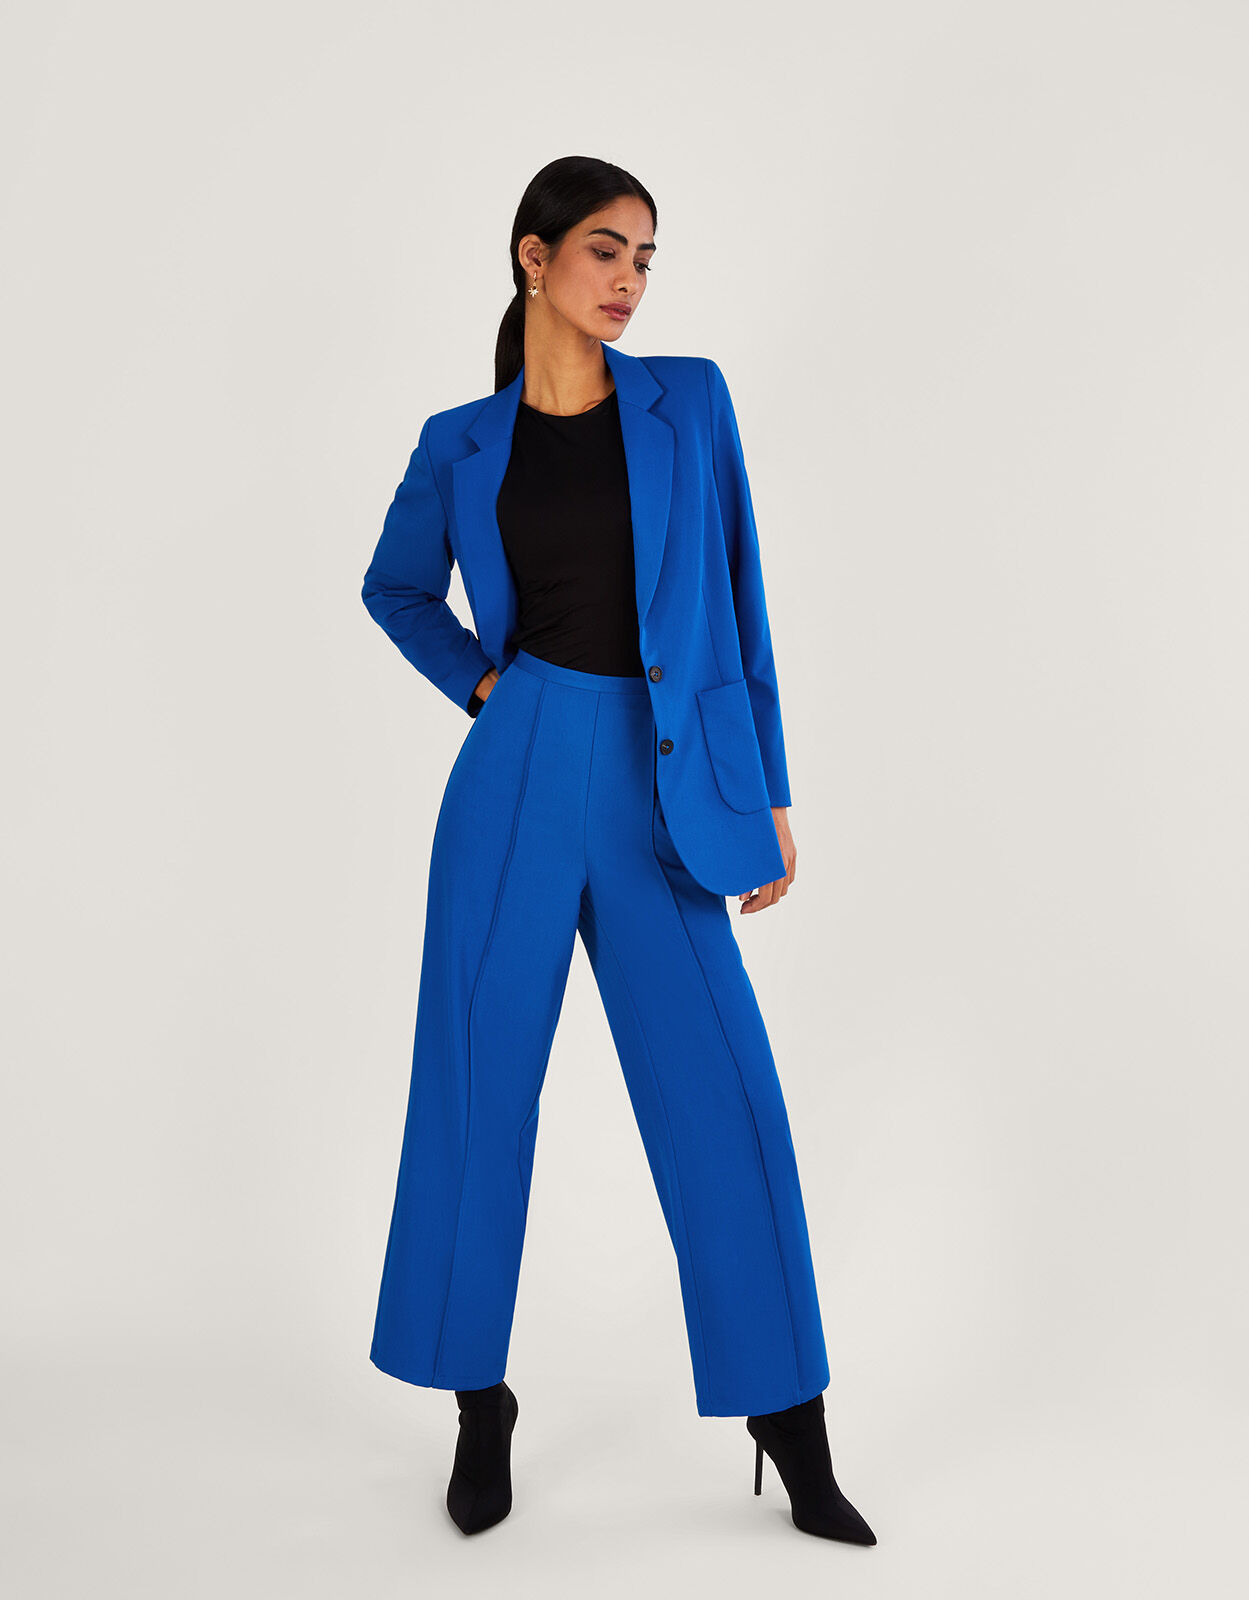 Pieces tailored trouser suit co-ord in bright blue | ASOS